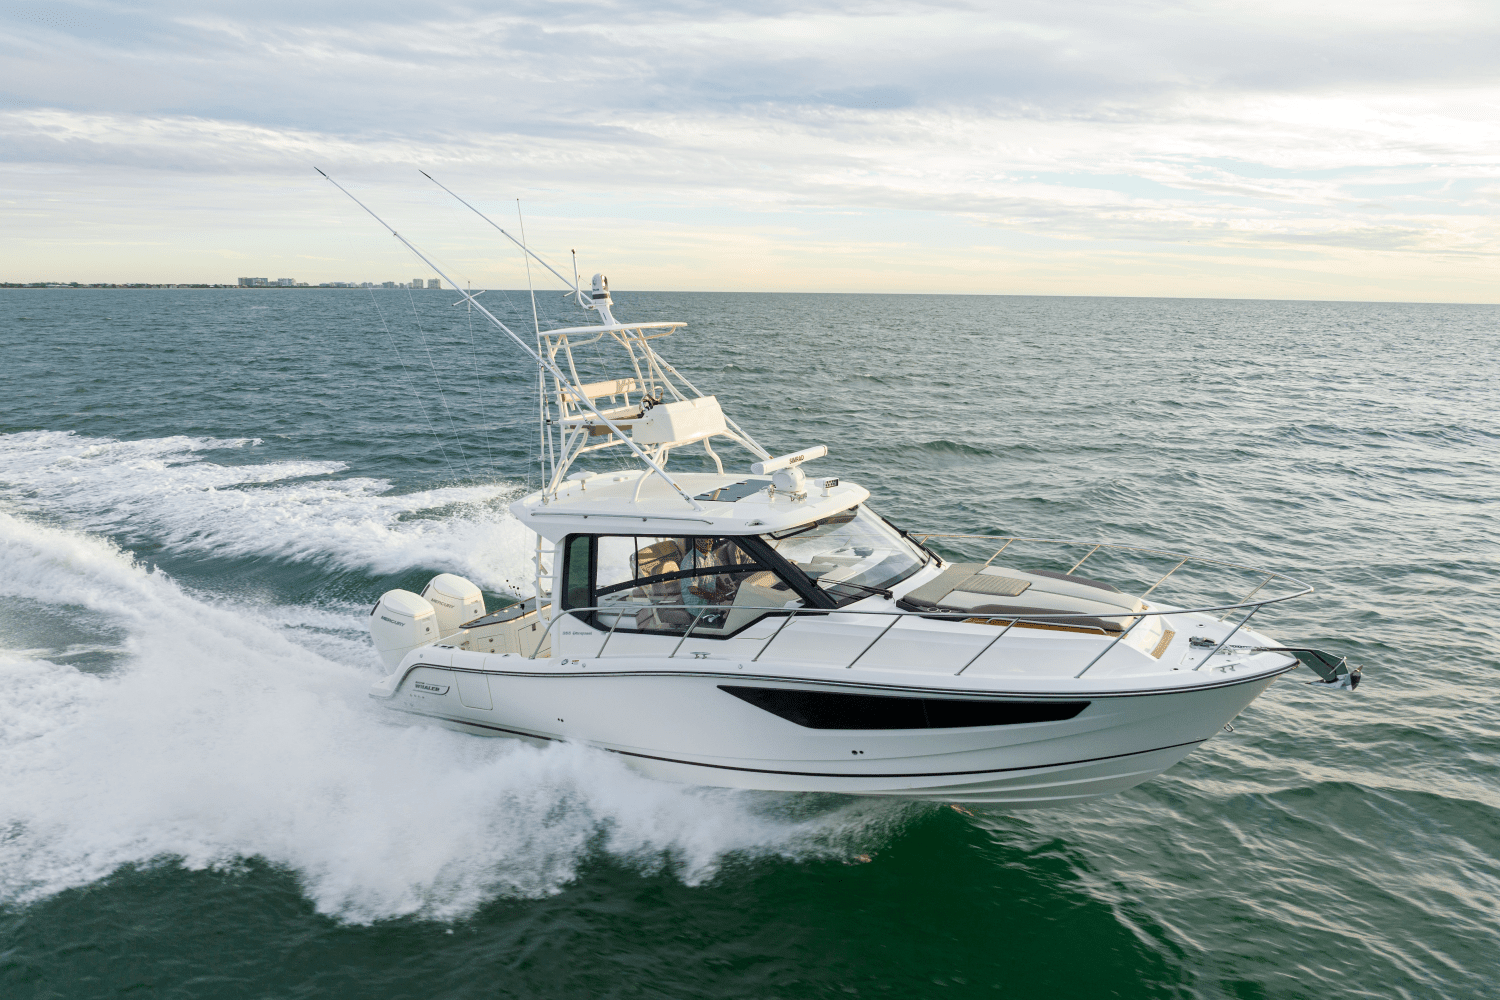 Top 5 Boston Whaler Models - Find the Perfect Ride for Your Next Adventure